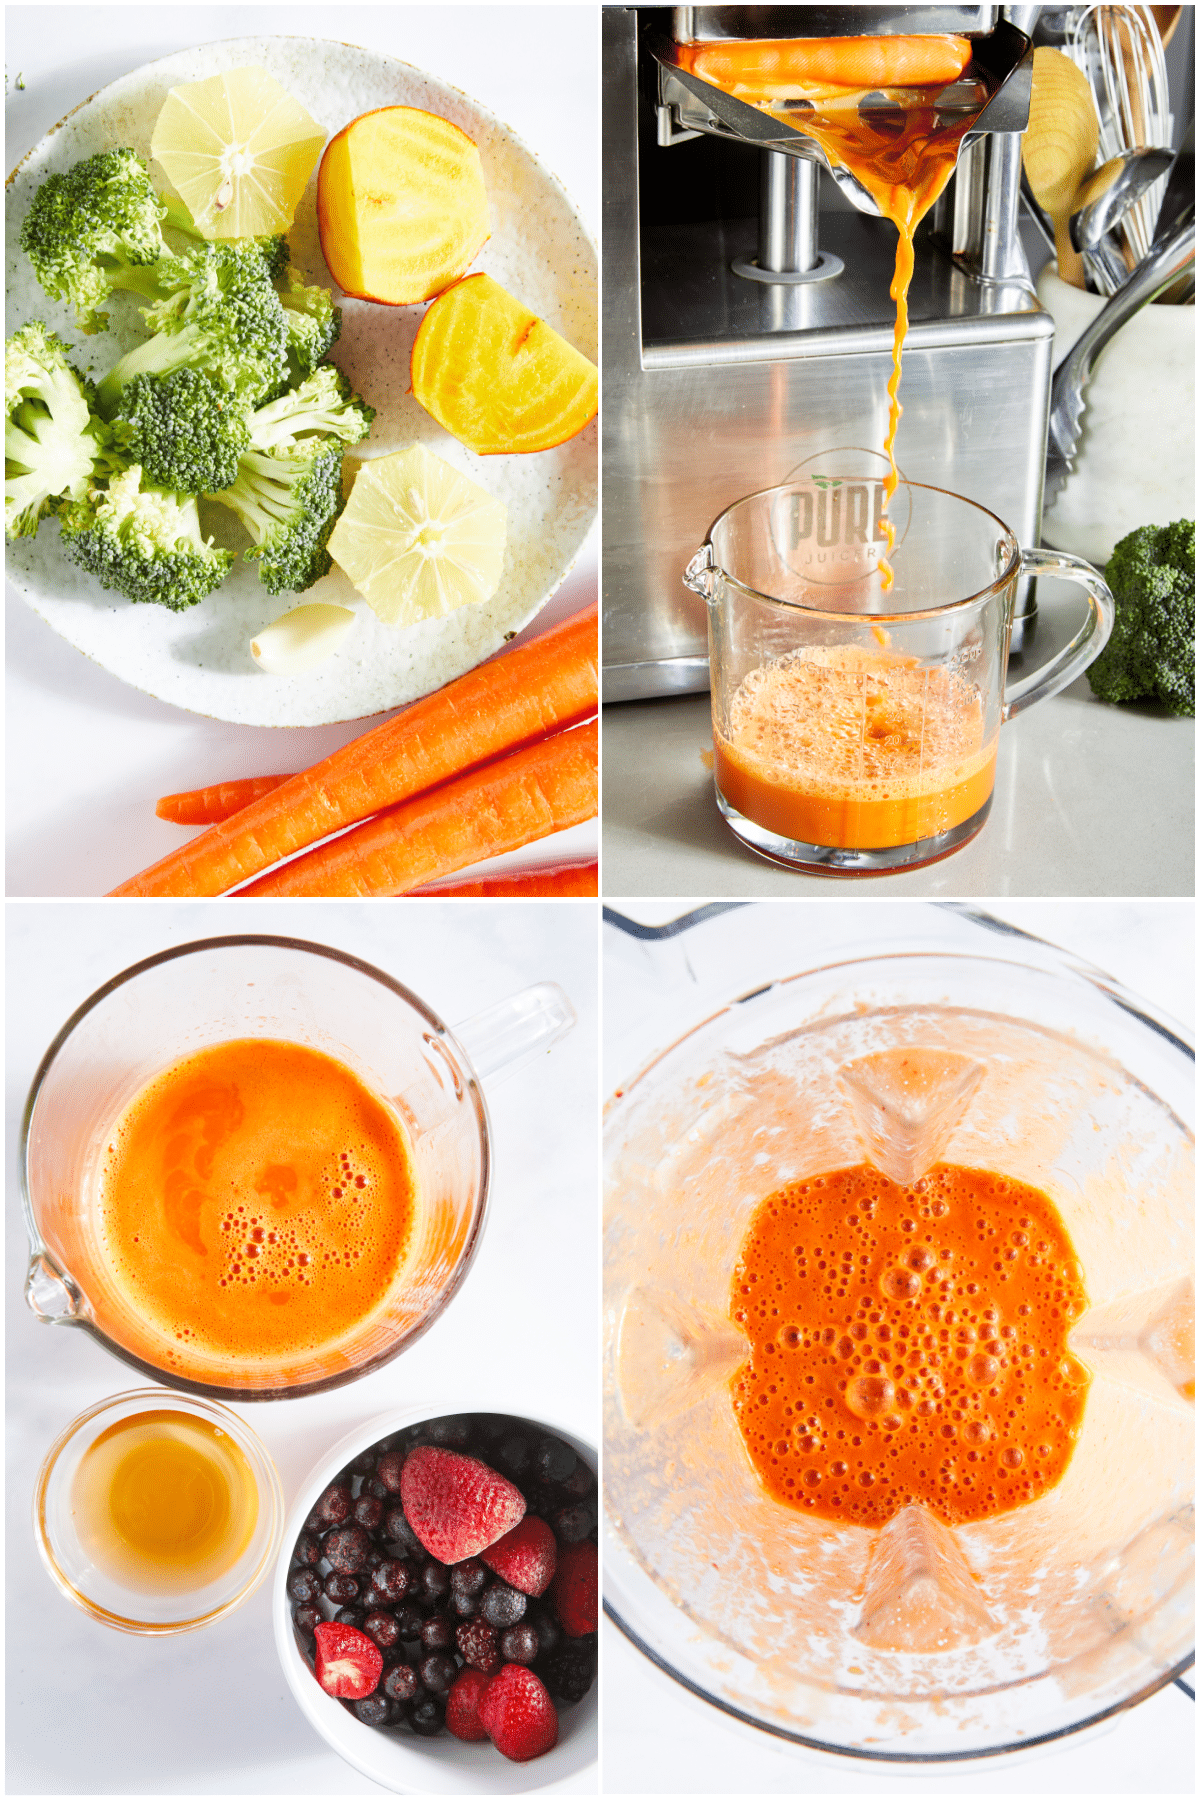 A four image collage showing how to make healthy defense juice, an immune boosting juice: chop a large tree of broccoli into smaller pieces, peel and seed a lemon, peel garlic cloves, and slice golden beets in smaller pieces. Push through juicer. Transfer fresh juice to blender and blend with mixed berries and apple cider vinegar.